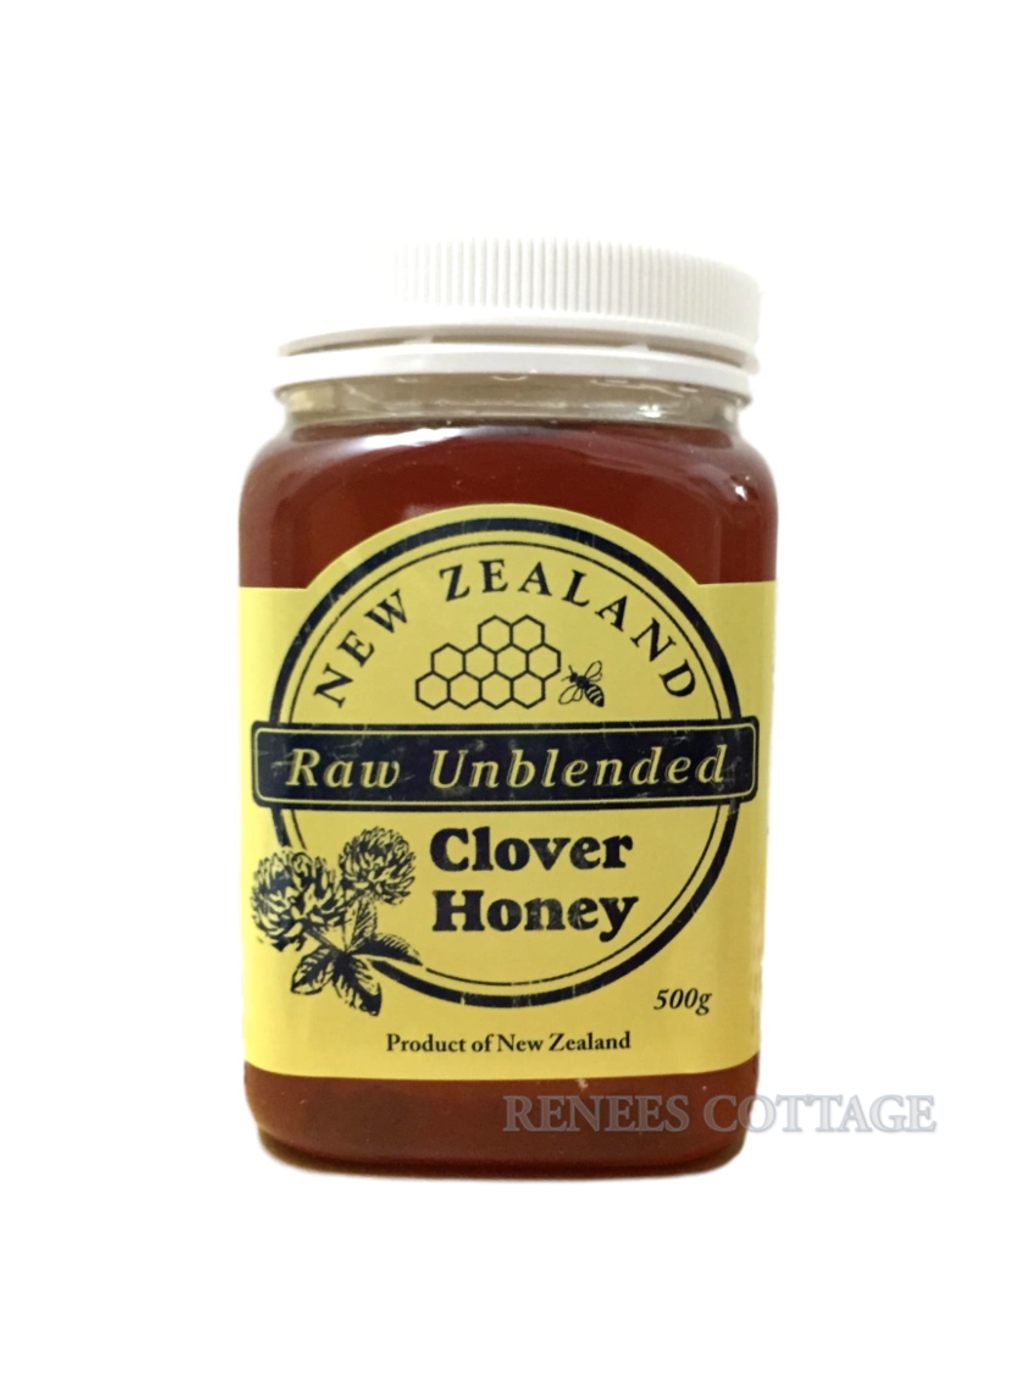 New Zealand Clover Honey, 500g_Watermarked.png